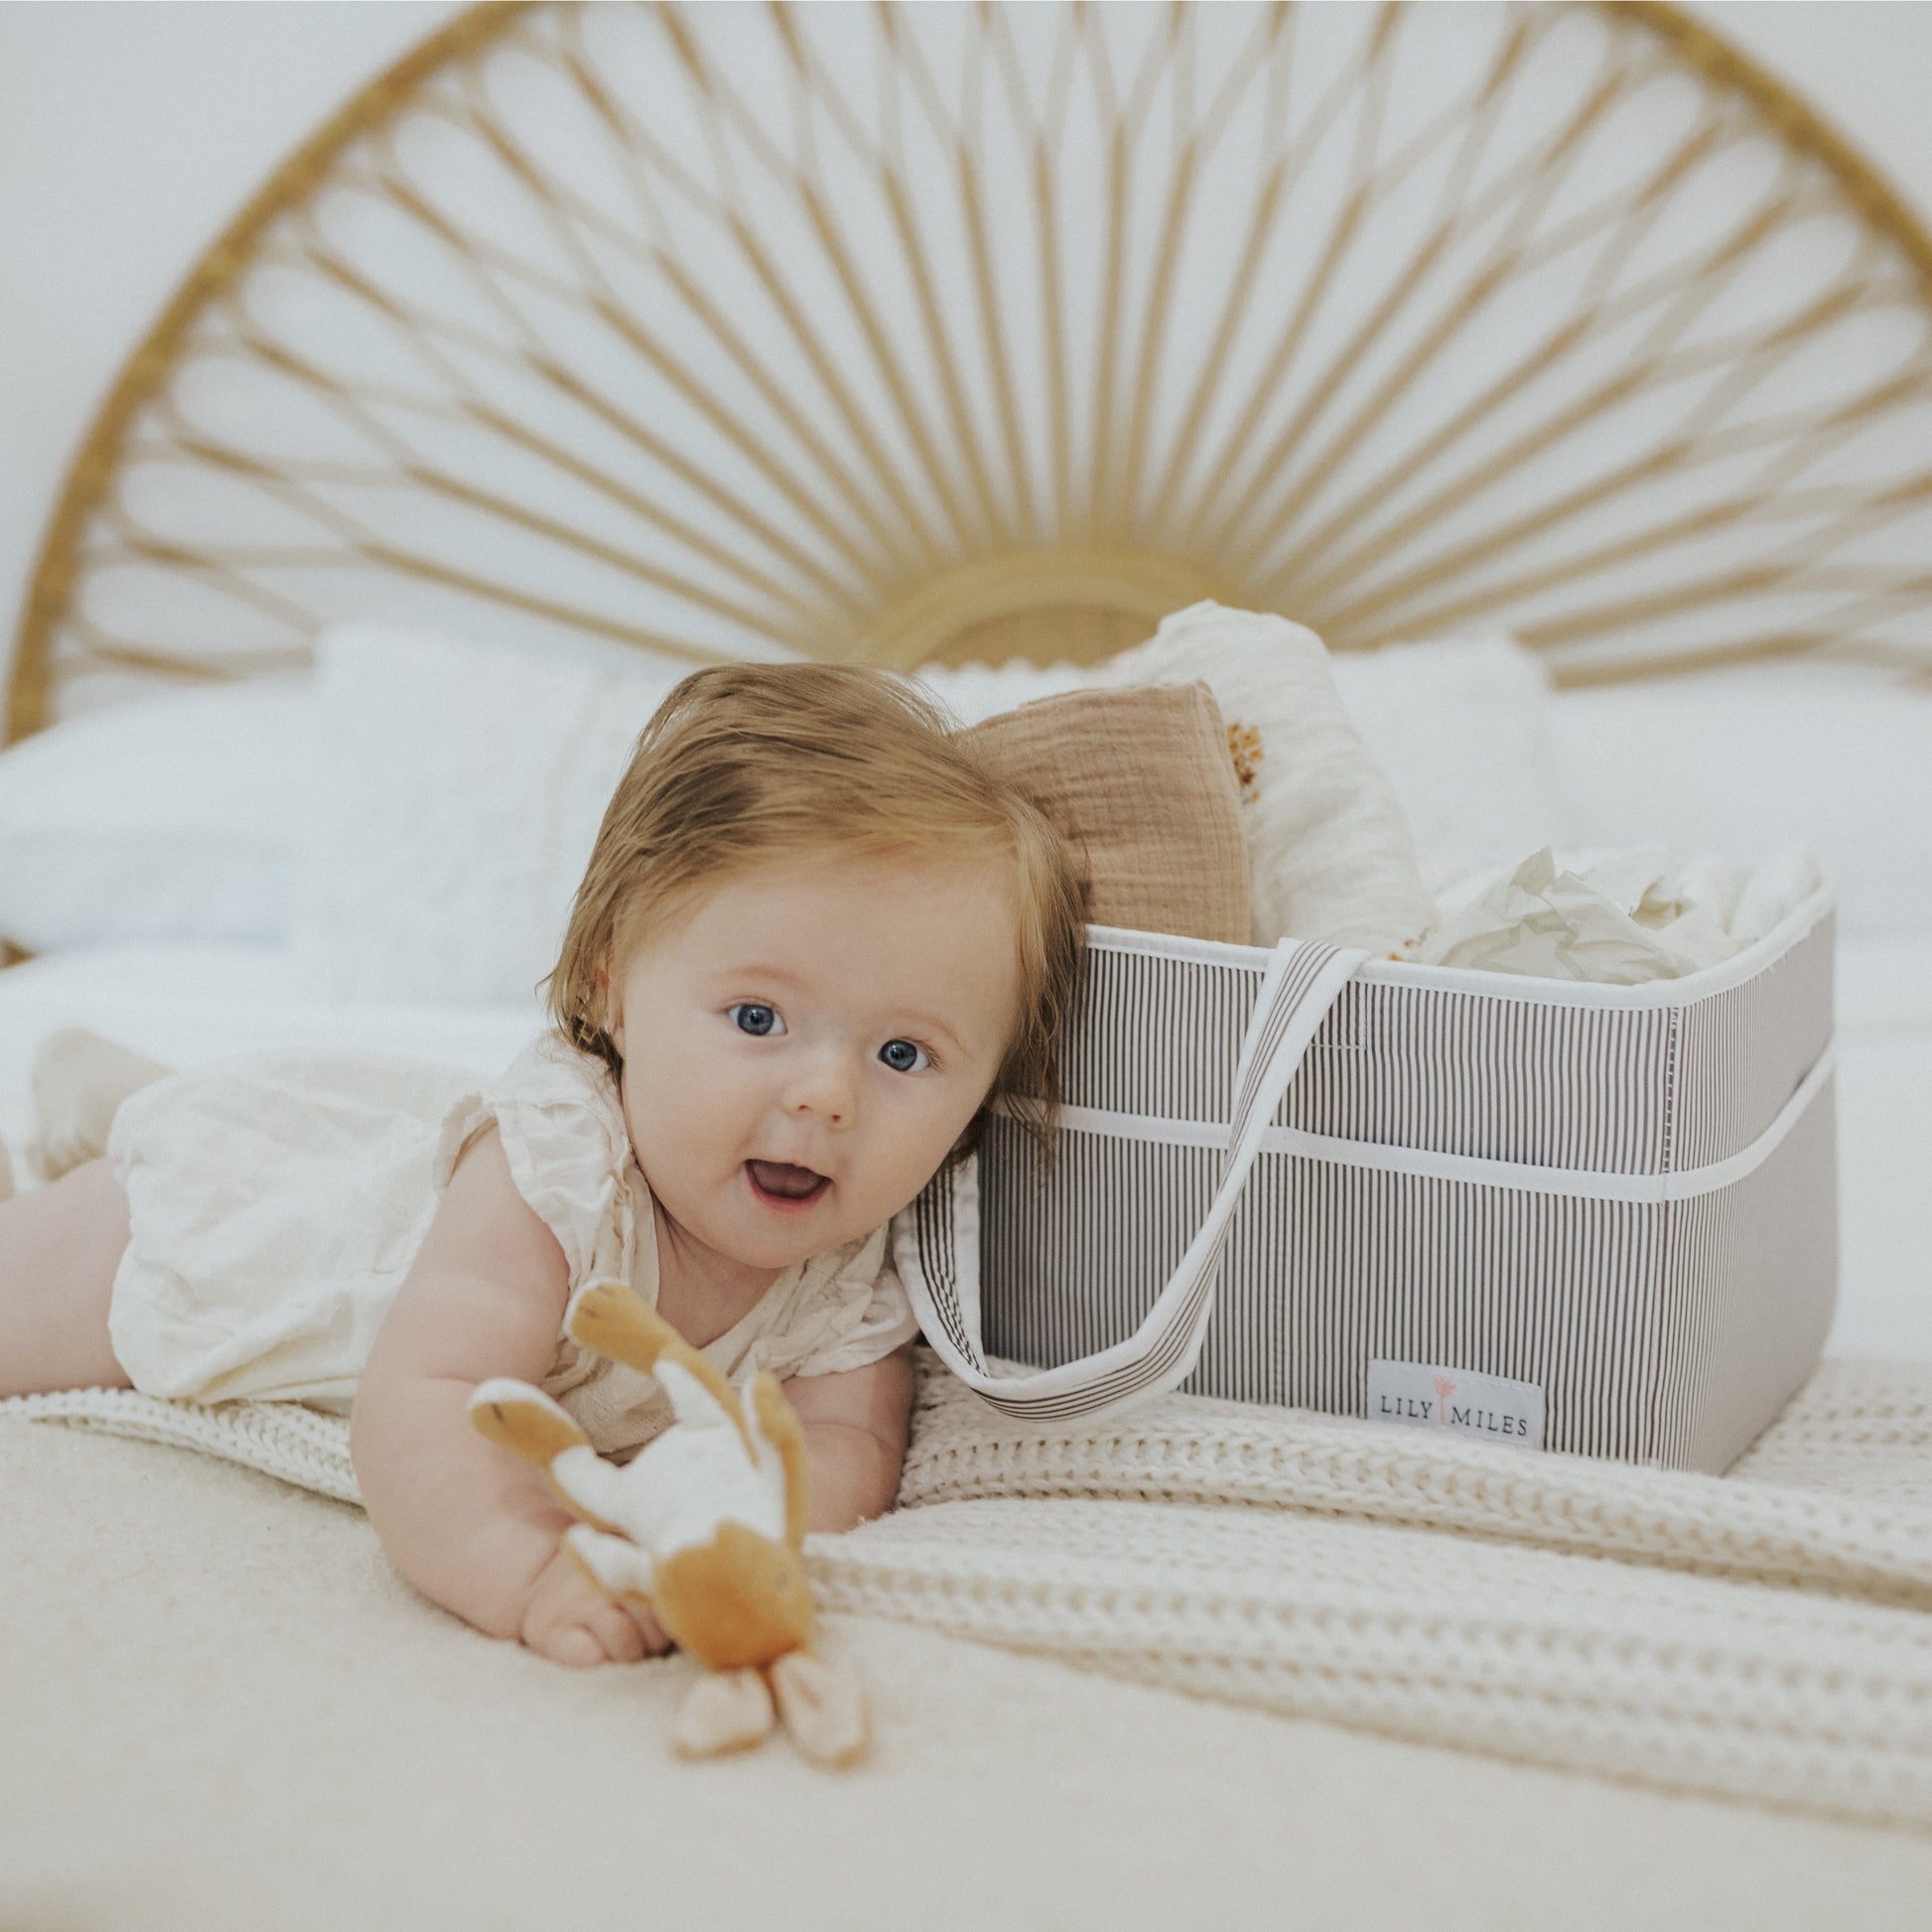 My Humble (Ahem, Cheap) Baby Necessity…The Diaper Caddy